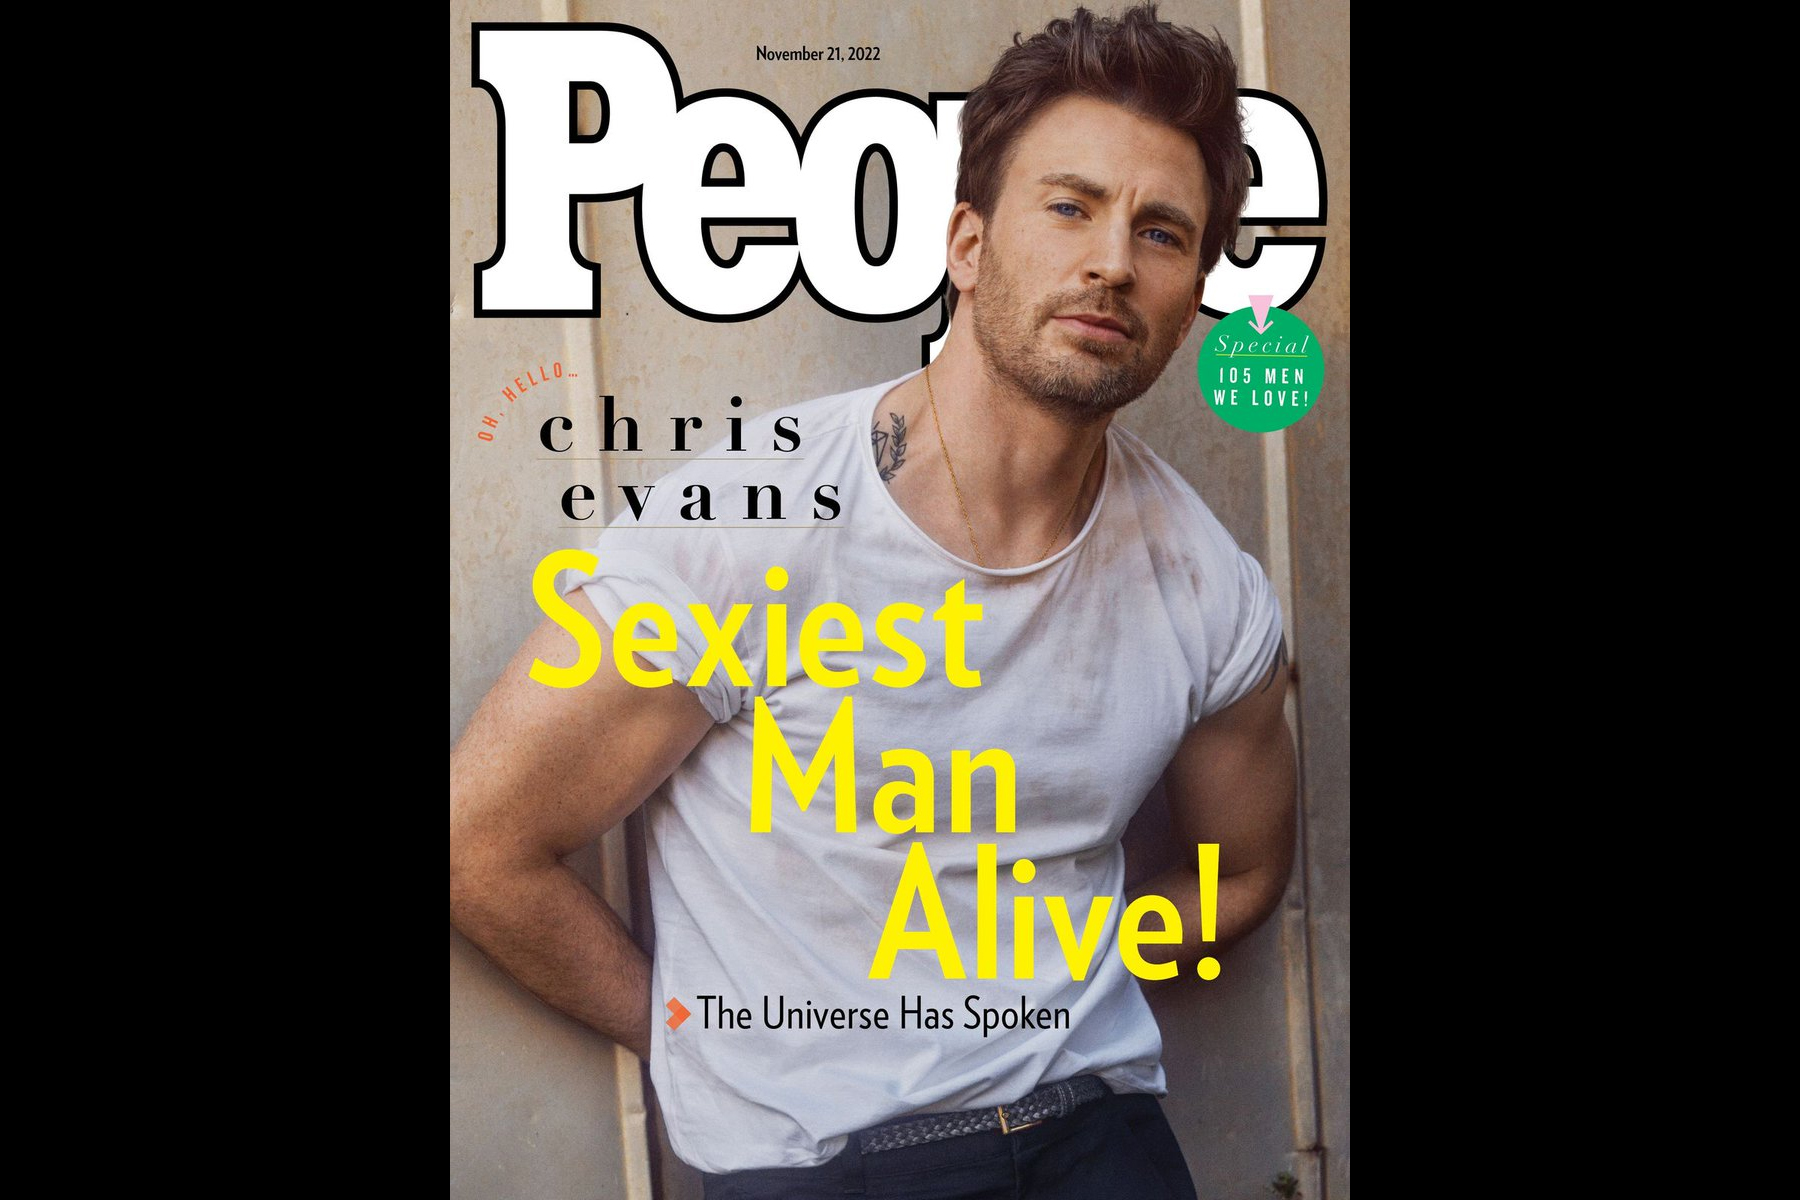 People's Sexiest Man Alive announcement gets booed; more: Buzz 